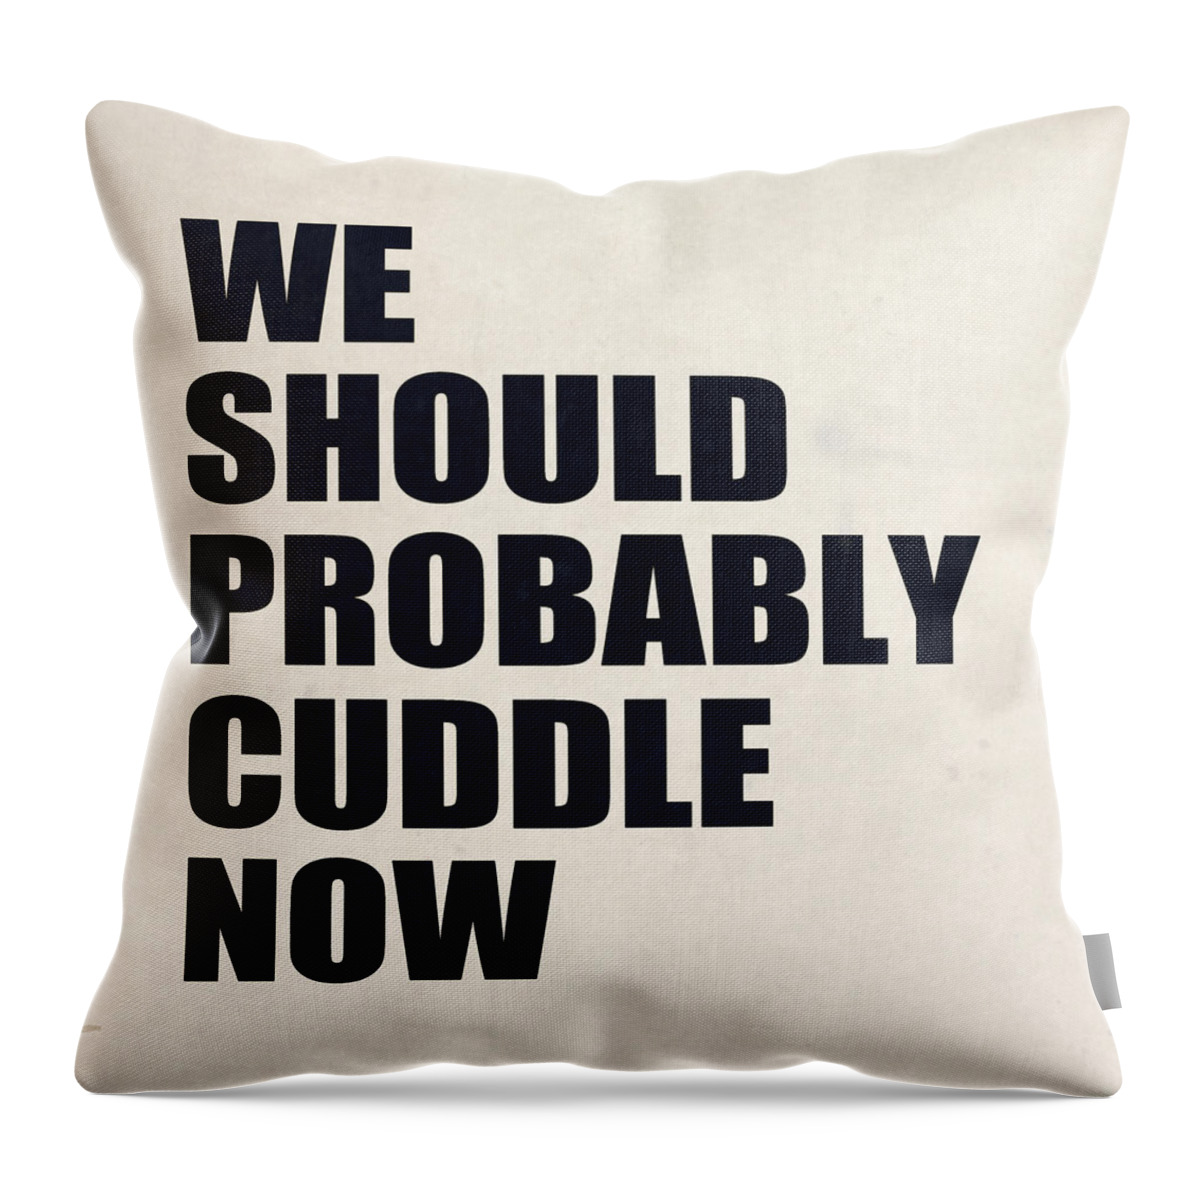 Cuddle Throw Pillow featuring the digital art We Should Probably Cuddle Now by Nicklas Gustafsson